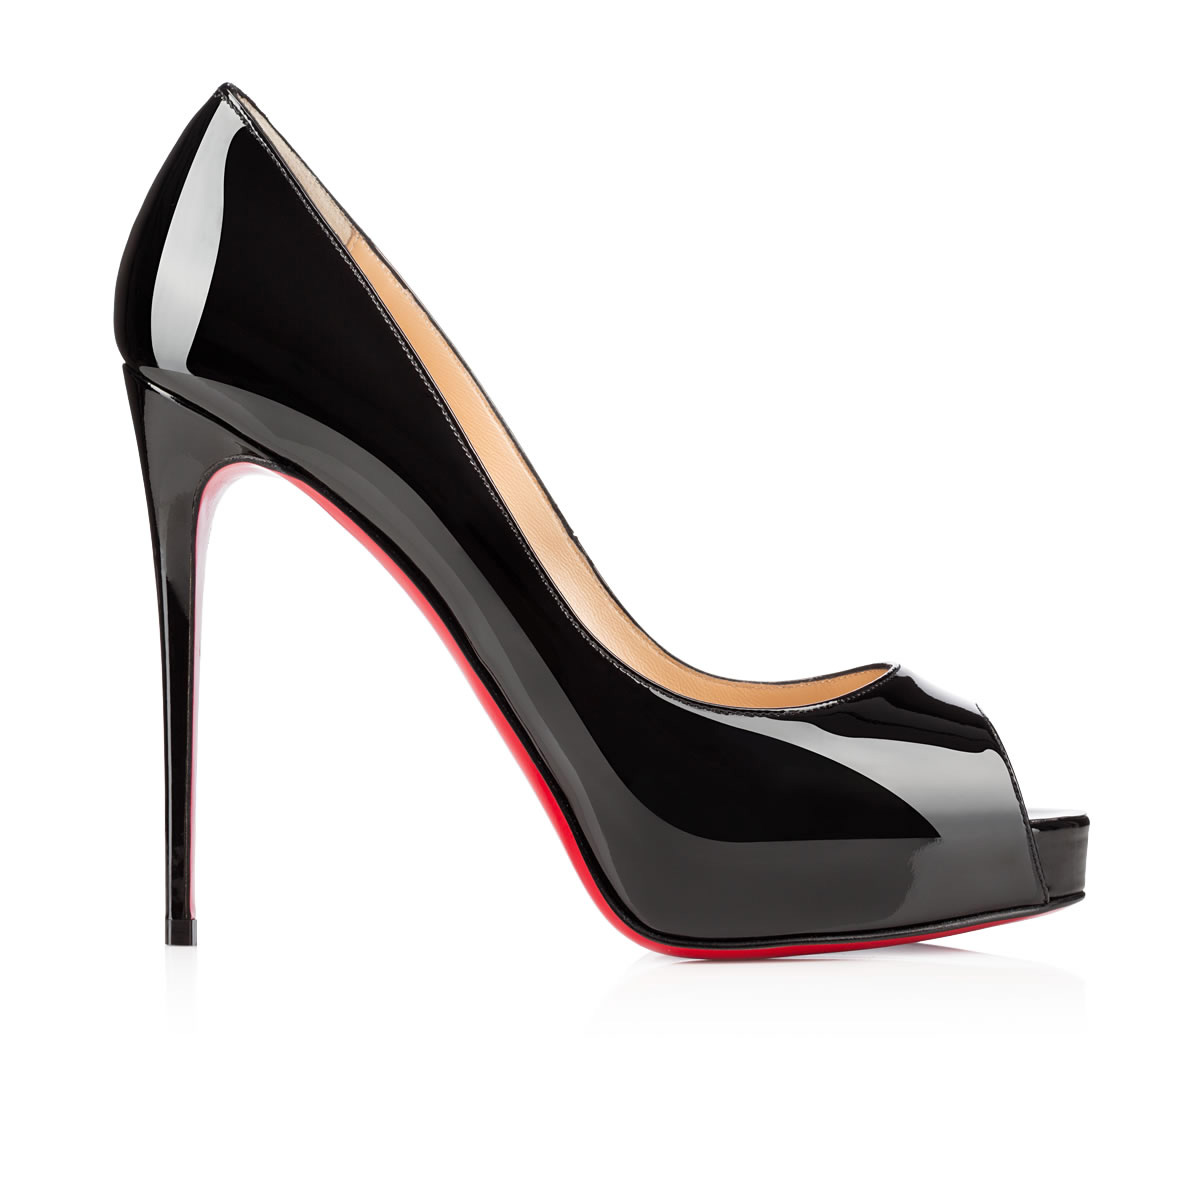 New Very Privé - mm pumps - Patent calf leather - Black - Christian Louboutin